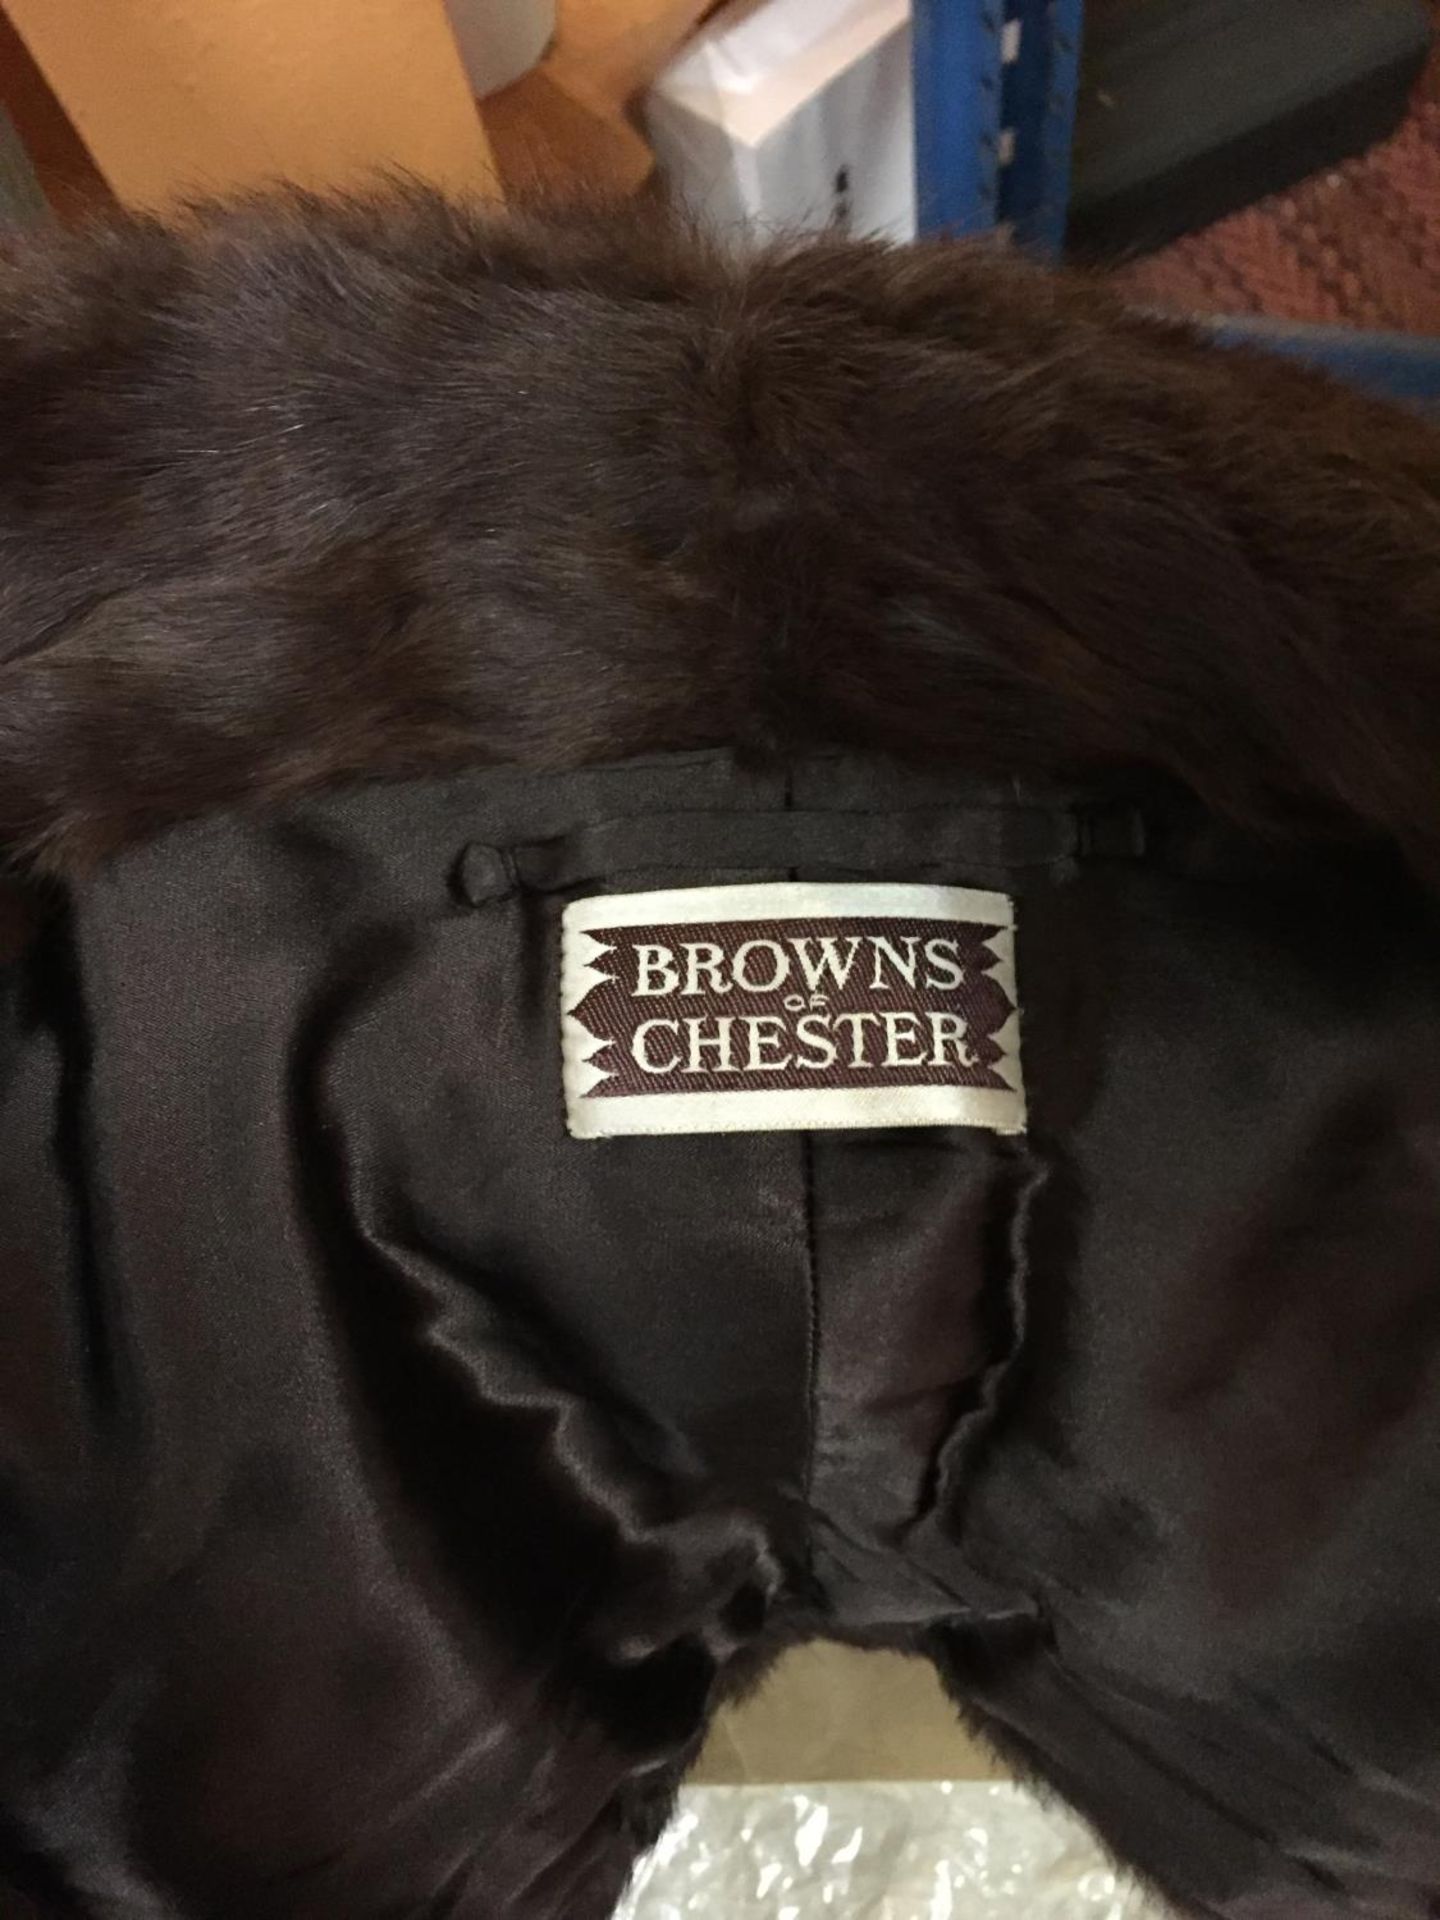 A FUR SHAWL BY BROWNS OF CHESTER - Image 3 of 3